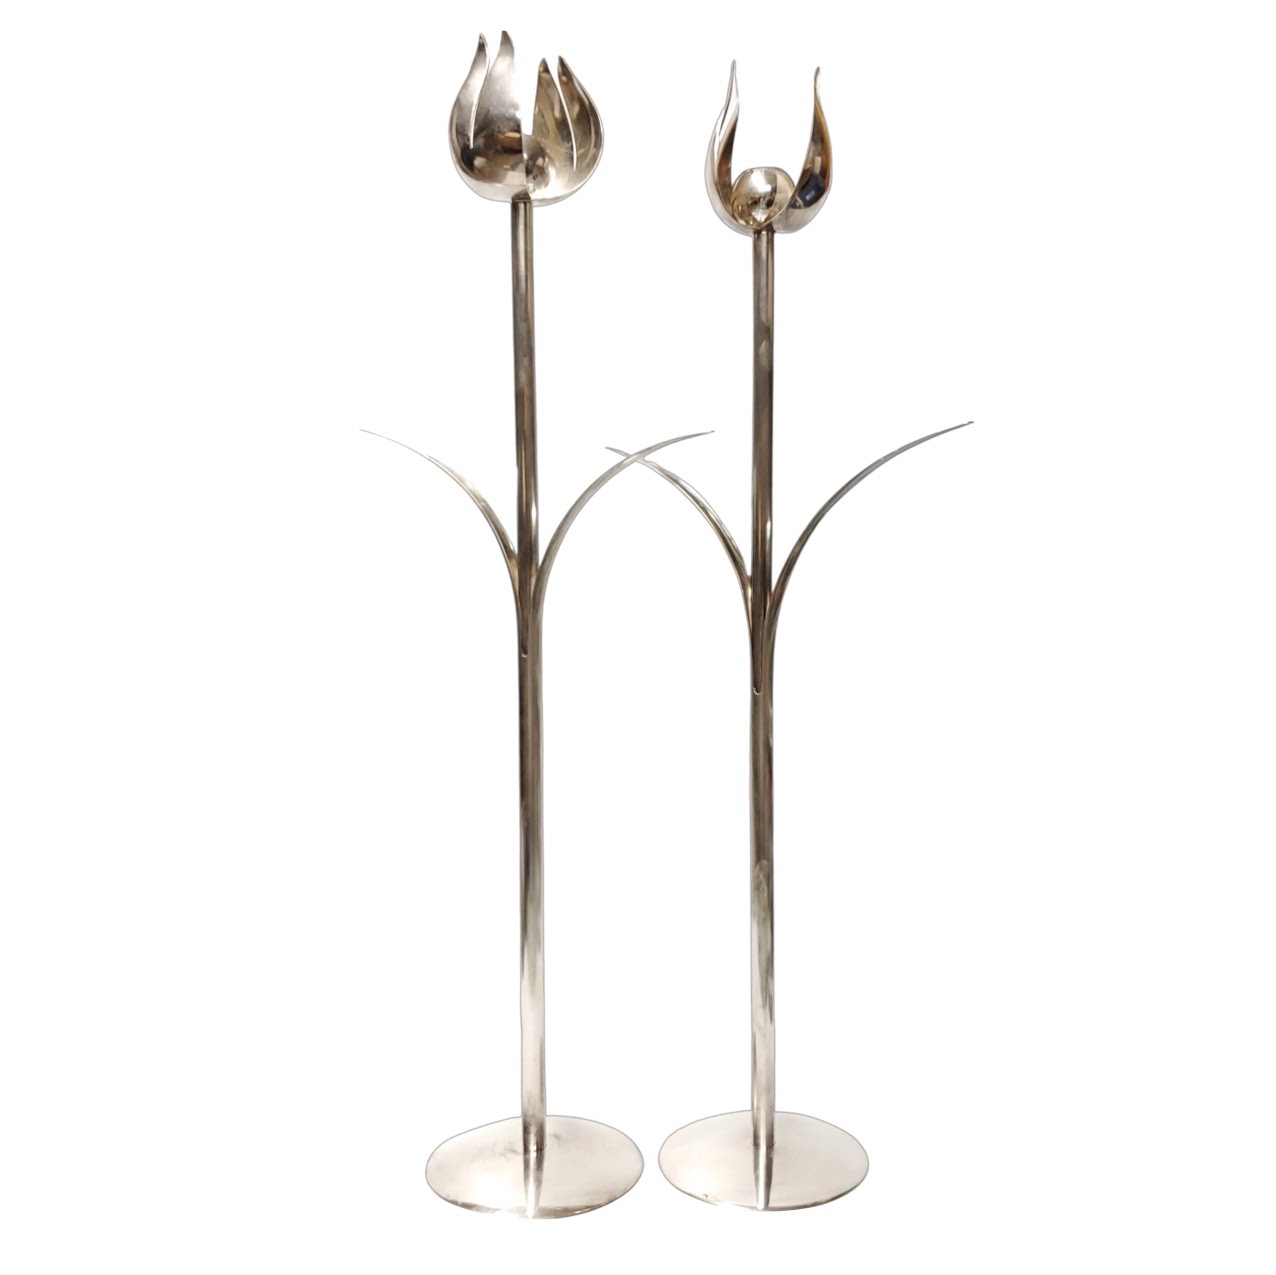 Giuliano Malimpesa Mesa 23" Floral Candlestick Holders